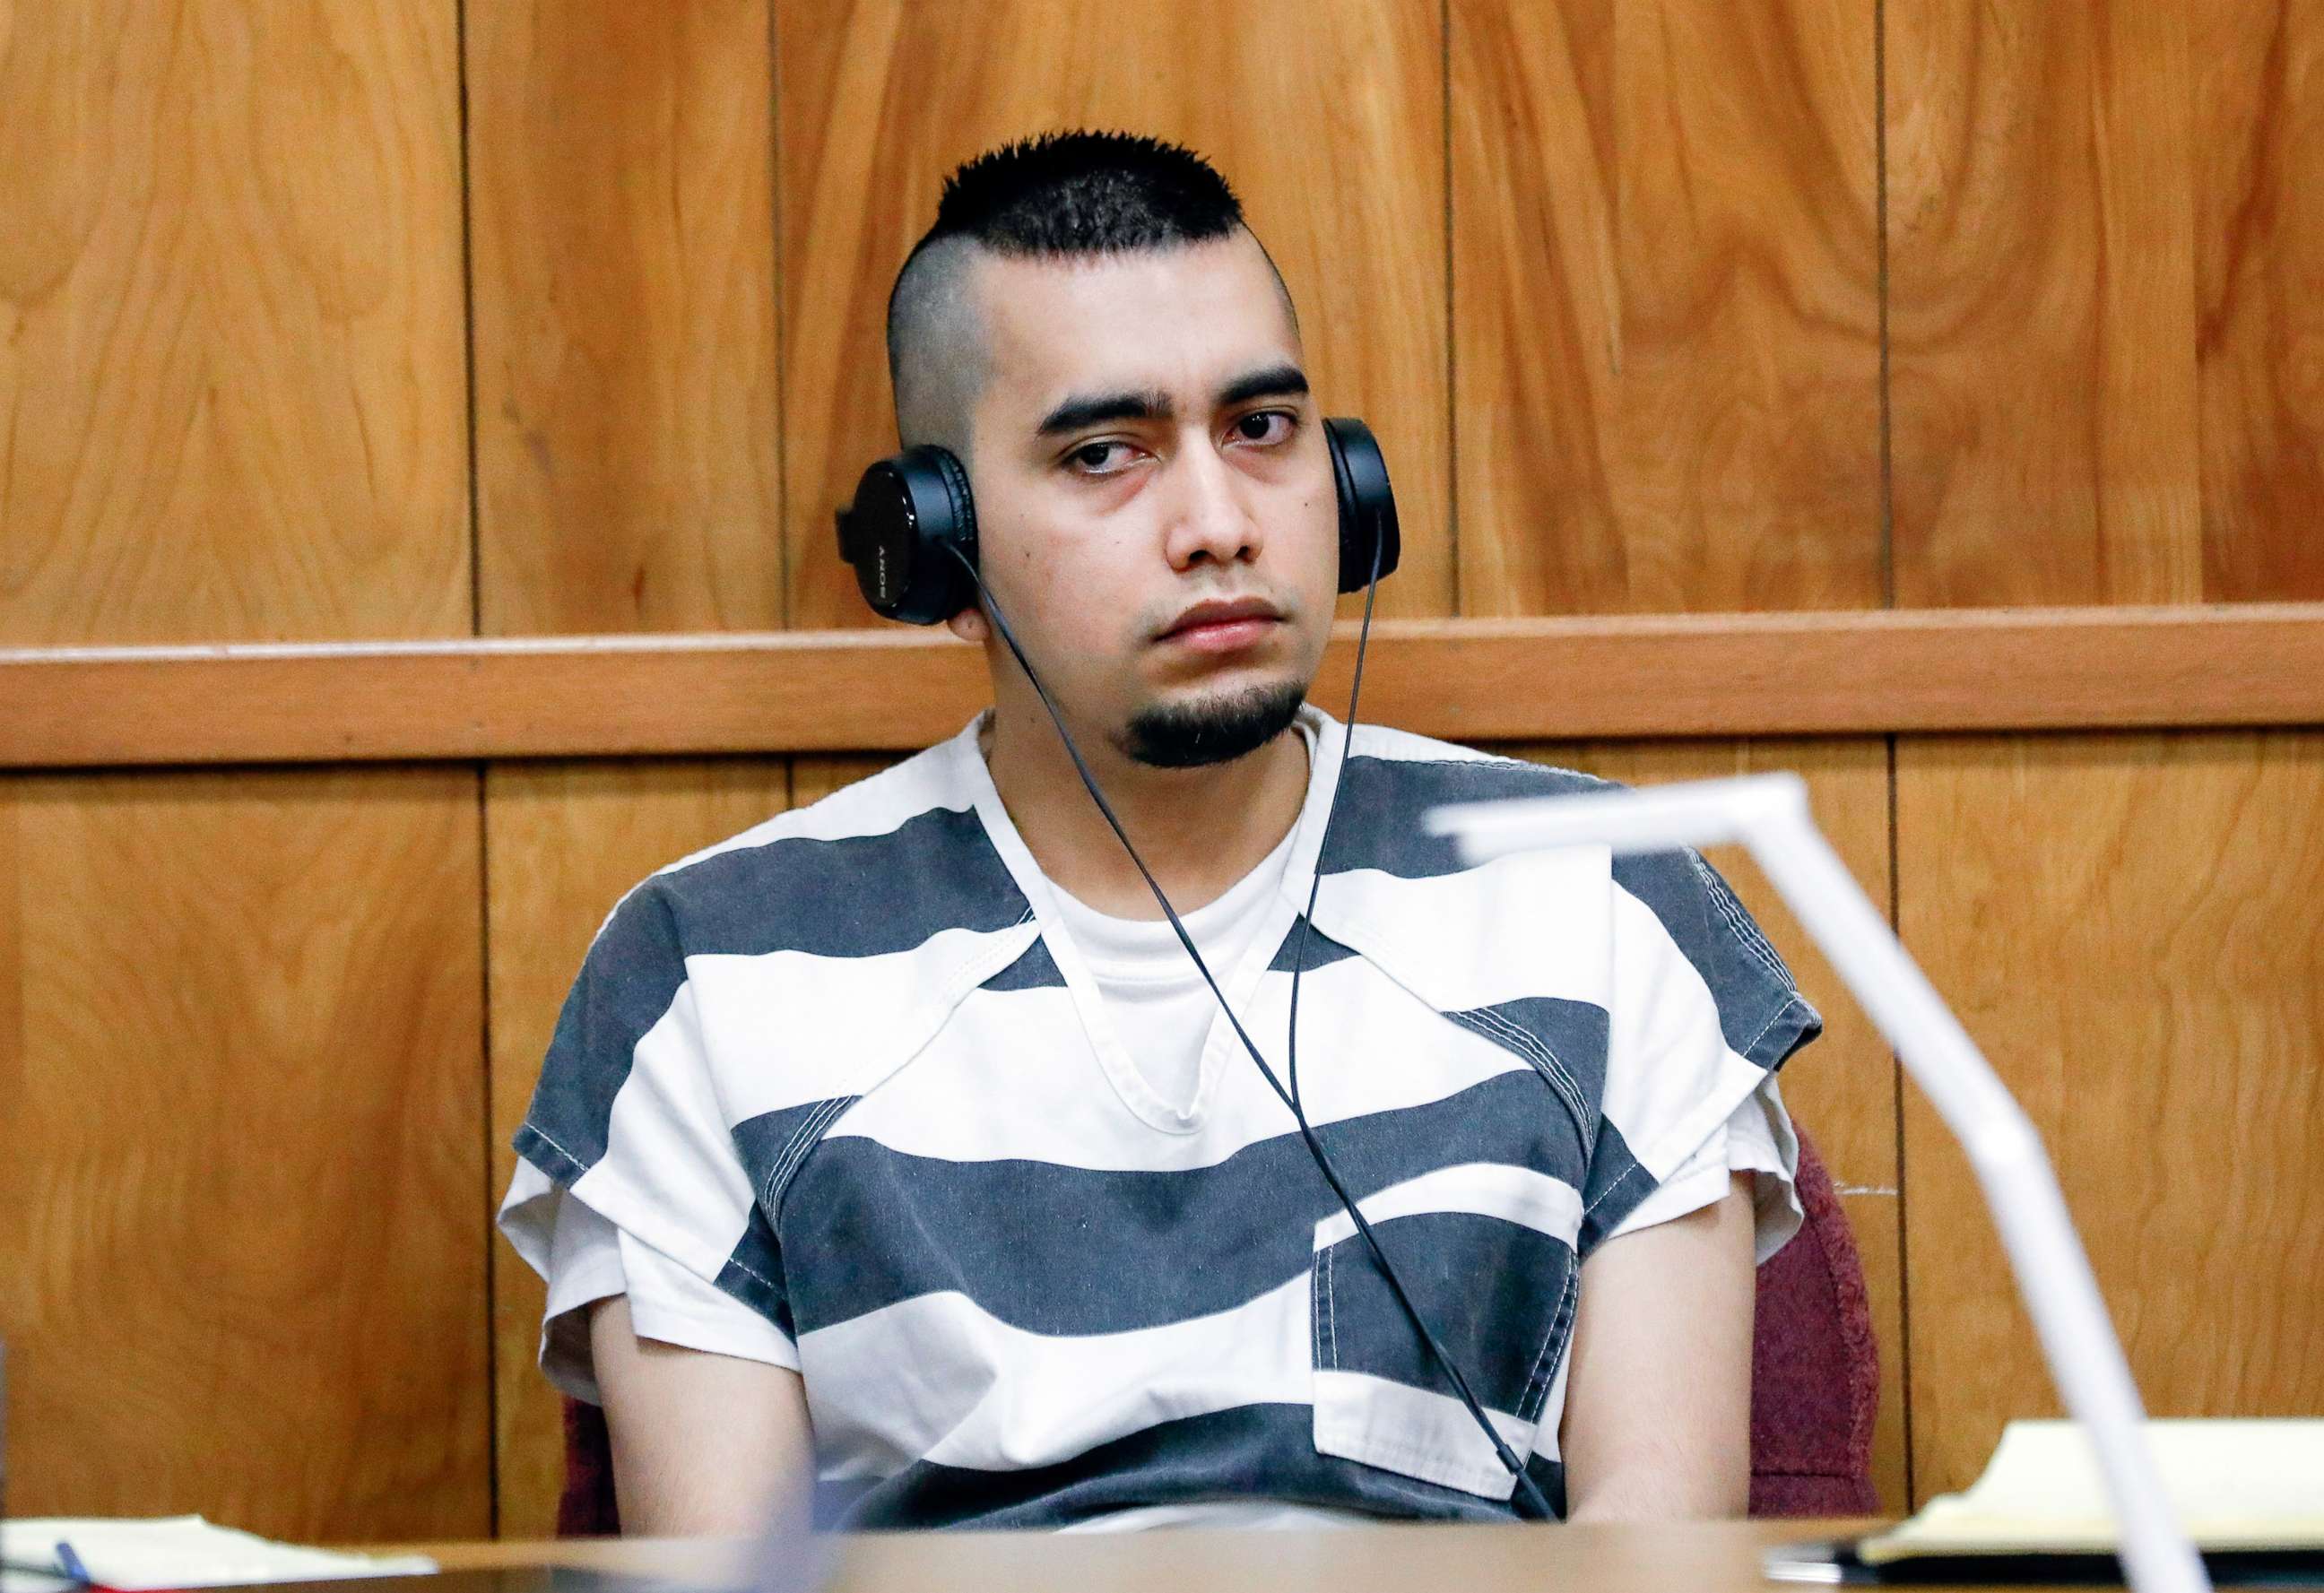 PHOTO: Cristhian Bahena Rivera appears during a hearing at the Poweshiek County Courthouse in Montezuma, Iowa, on July 15, 2021. Bahena Rivera was convicted of killing University of Iowa student Mollie Tibbetts in 2018.